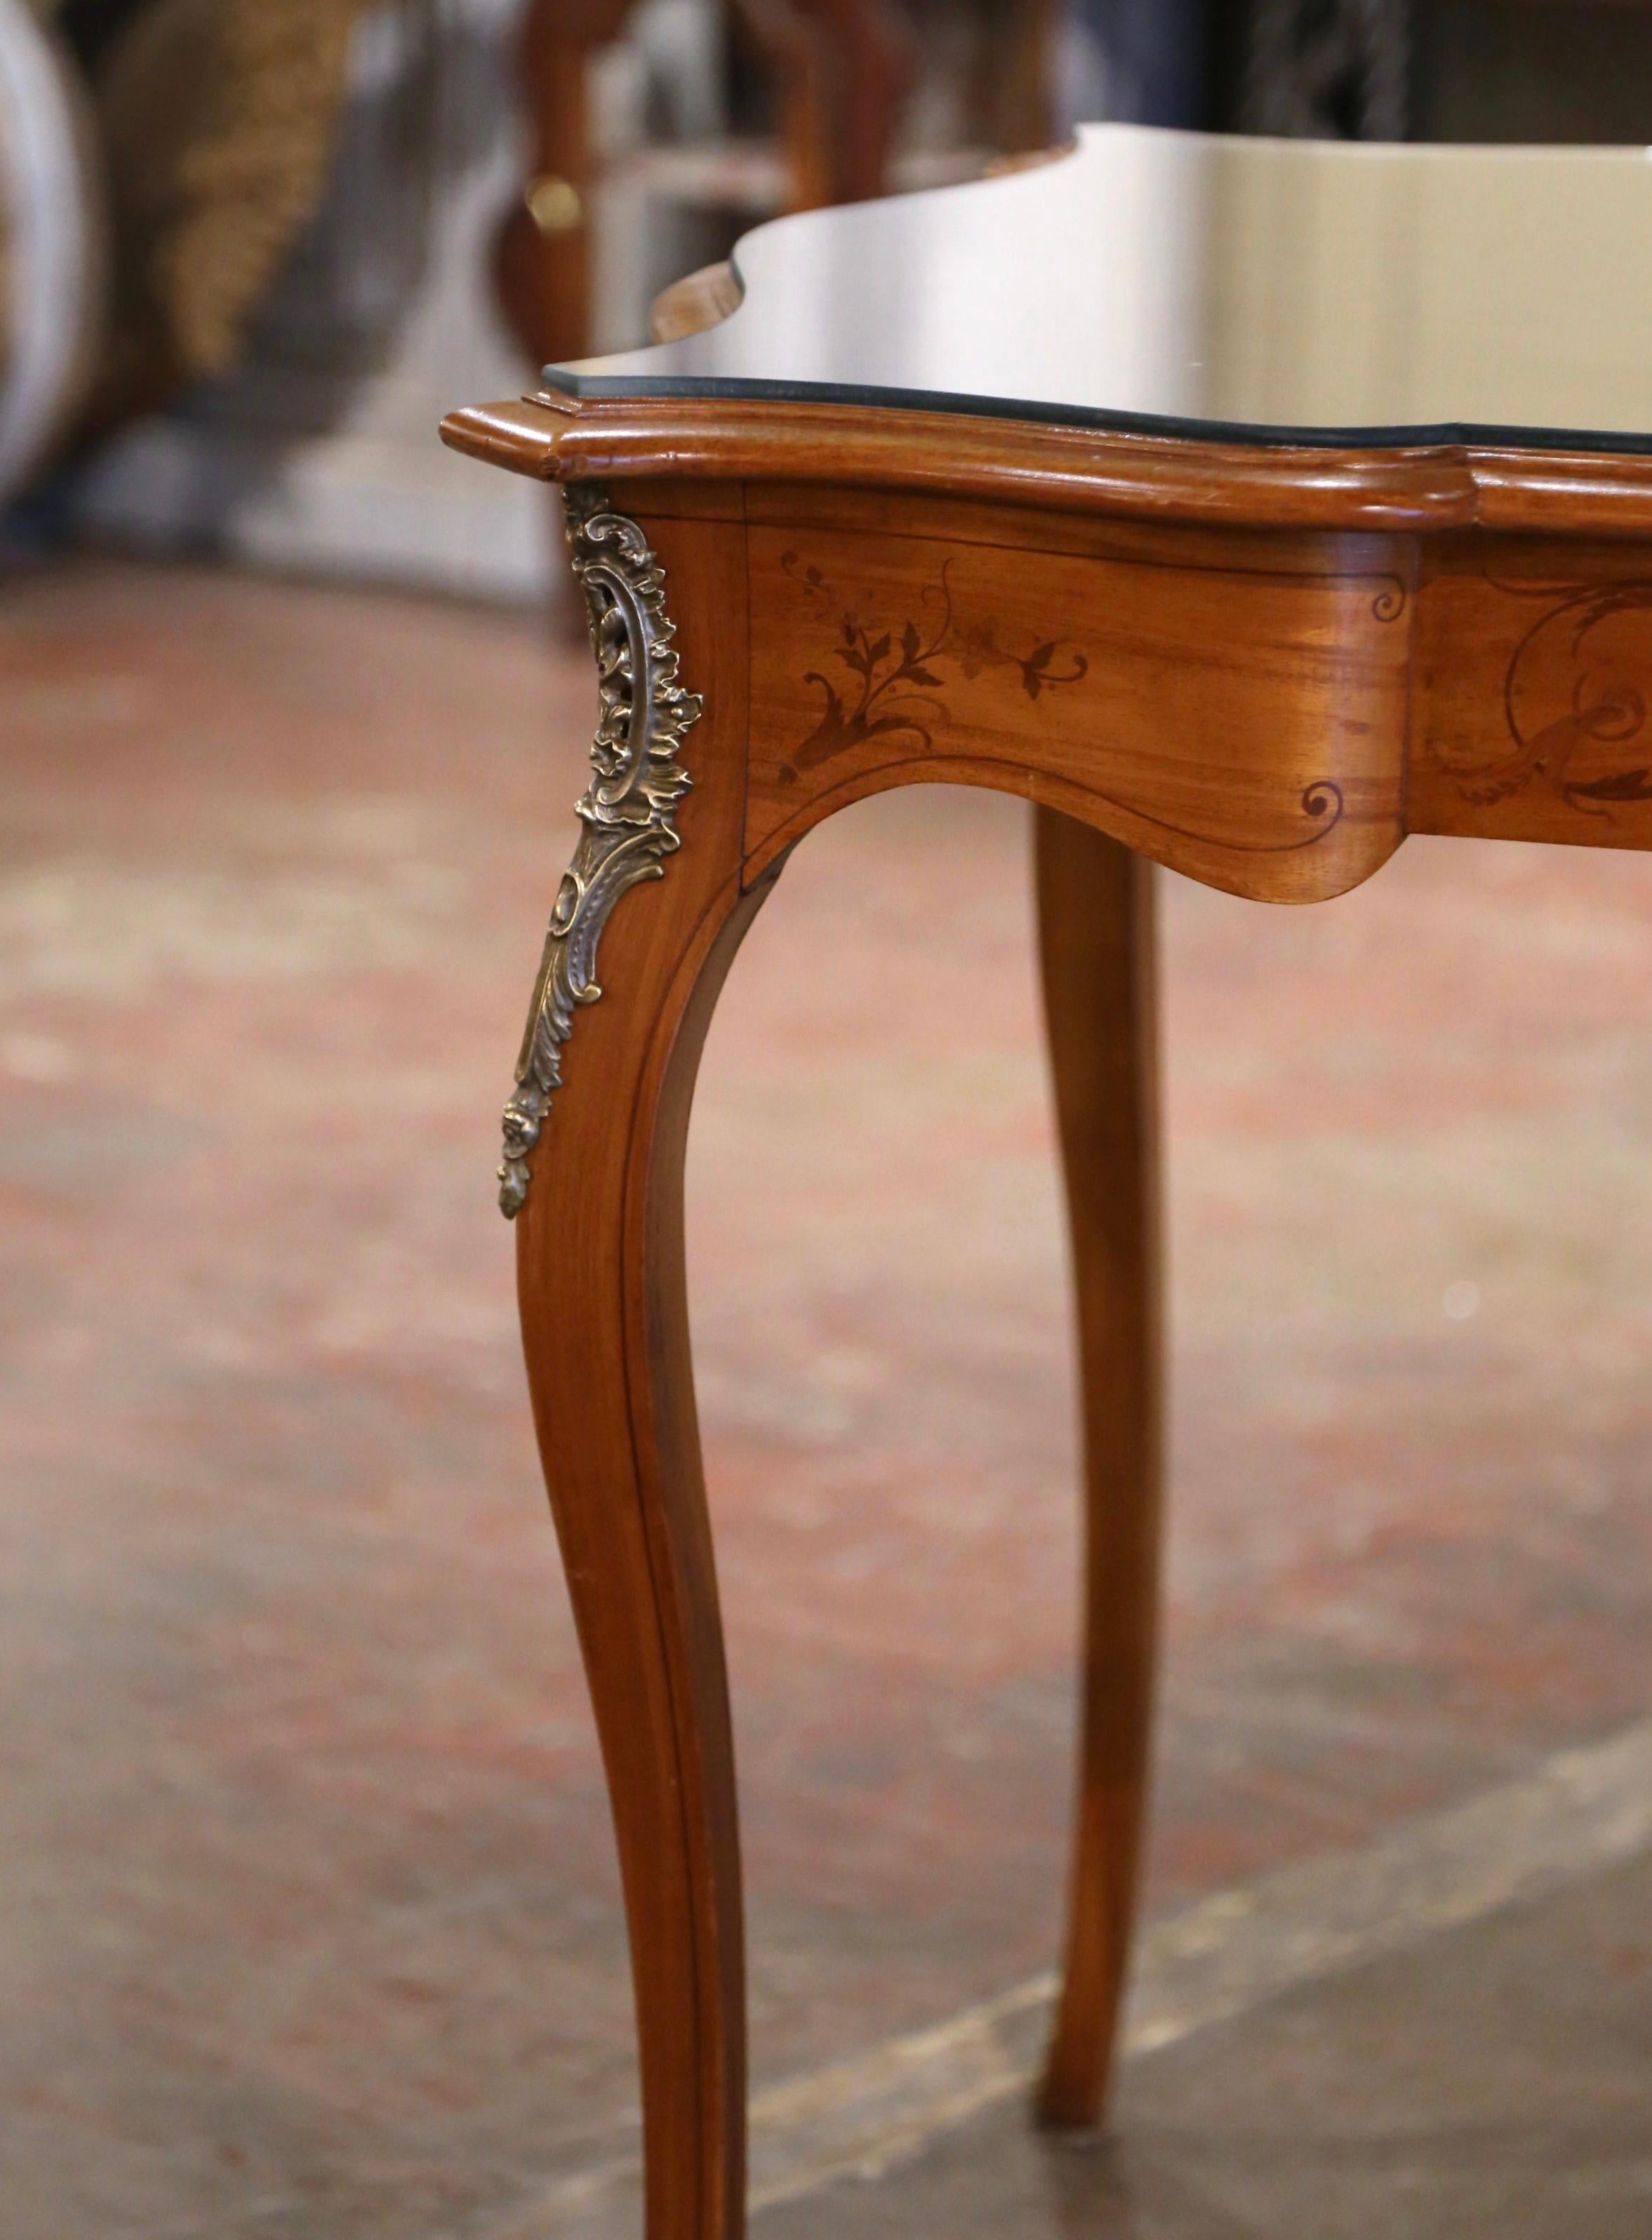 Early 20th Century French Louis XV Inlaid Walnut Table with Protective Glass  For Sale 1